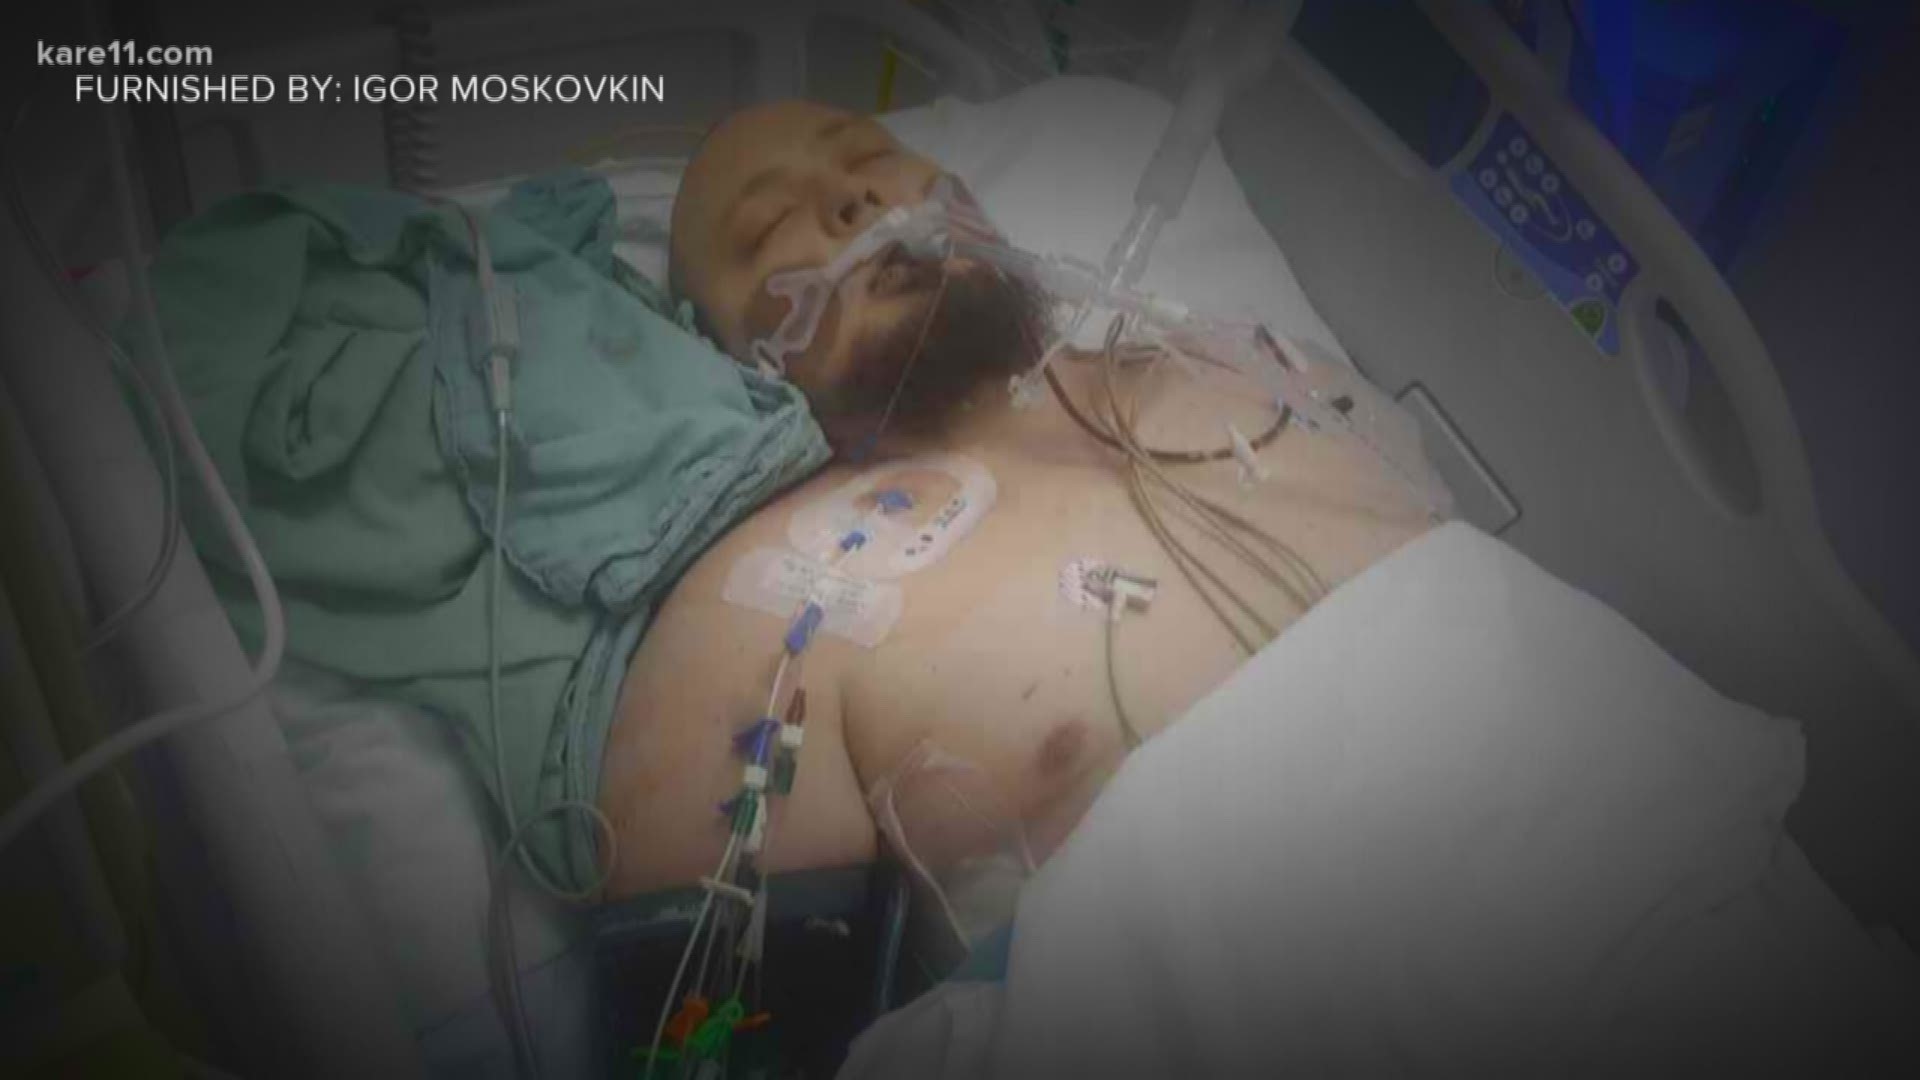 A Minnesota family is demanding answers after their son and brother was found severely beaten at a Mexican resort, suffering from injuries that would eventually claim his life.